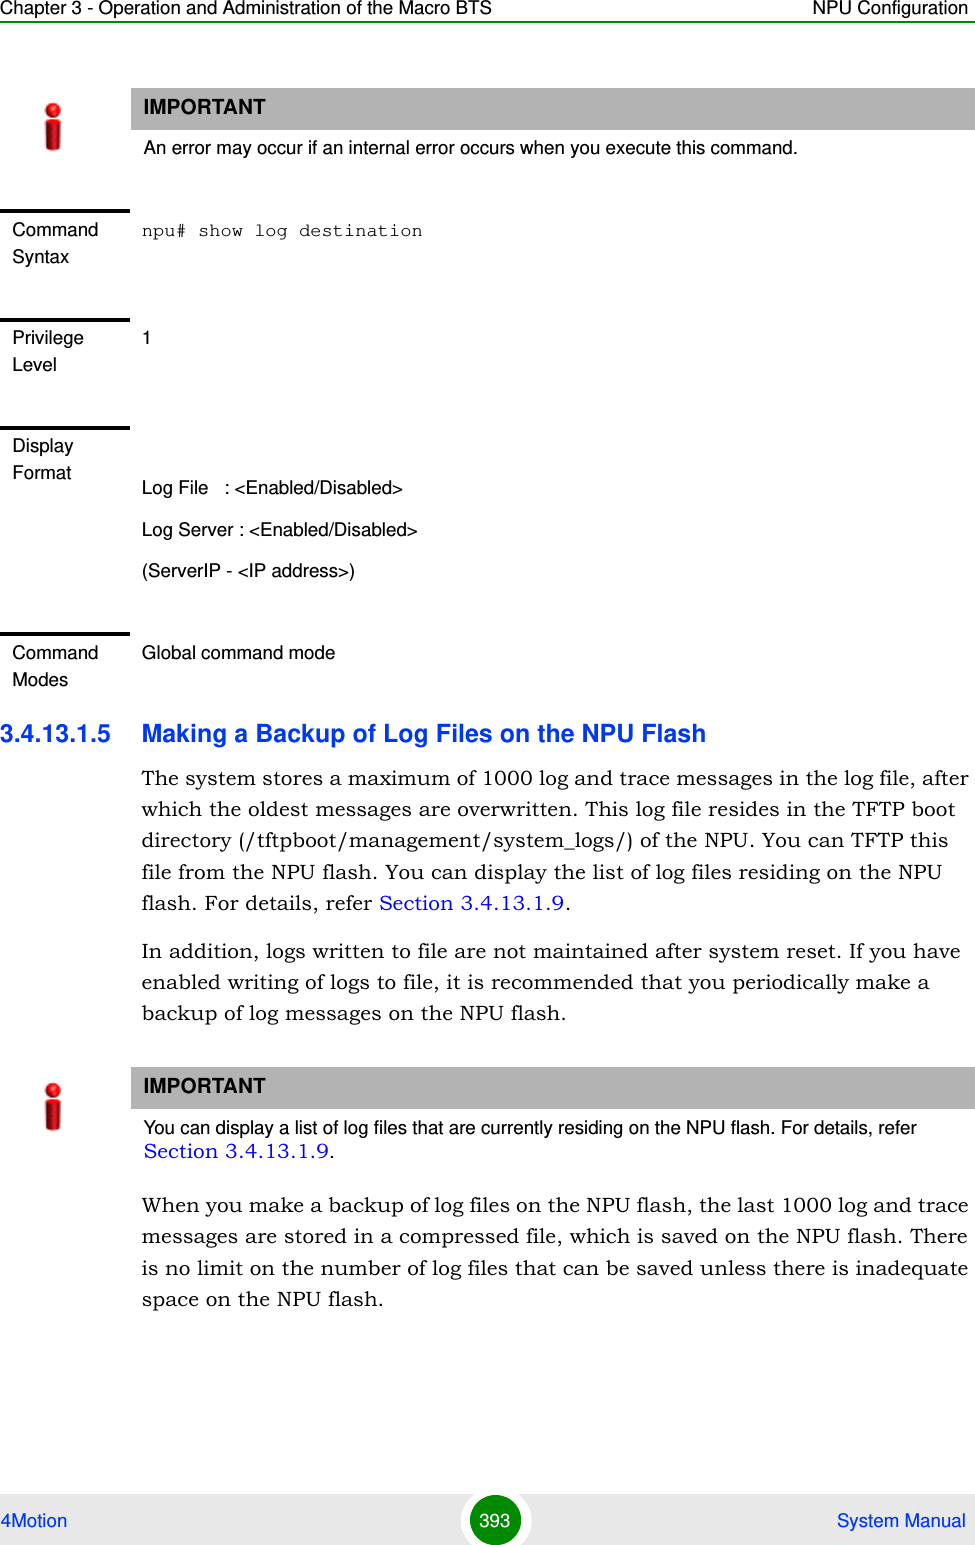 Chapter 3 - Operation and Administration of the Macro BTS NPU Configuration4Motion 393  System Manual3.4.13.1.5 Making a Backup of Log Files on the NPU FlashThe system stores a maximum of 1000 log and trace messages in the log file, after which the oldest messages are overwritten. This log file resides in the TFTP boot directory (/tftpboot/management/system_logs/) of the NPU. You can TFTP this file from the NPU flash. You can display the list of log files residing on the NPU flash. For details, refer Section 3.4.13.1.9. In addition, logs written to file are not maintained after system reset. If you have enabled writing of logs to file, it is recommended that you periodically make a backup of log messages on the NPU flash.When you make a backup of log files on the NPU flash, the last 1000 log and trace messages are stored in a compressed file, which is saved on the NPU flash. There is no limit on the number of log files that can be saved unless there is inadequate space on the NPU flash.IMPORTANTAn error may occur if an internal error occurs when you execute this command.Command Syntaxnpu# show log destinationPrivilege Level1Display Format Log File   : &lt;Enabled/Disabled&gt;Log Server : &lt;Enabled/Disabled&gt;(ServerIP - &lt;IP address&gt;)Command ModesGlobal command modeIMPORTANTYou can display a list of log files that are currently residing on the NPU flash. For details, refer Section 3.4.13.1.9.